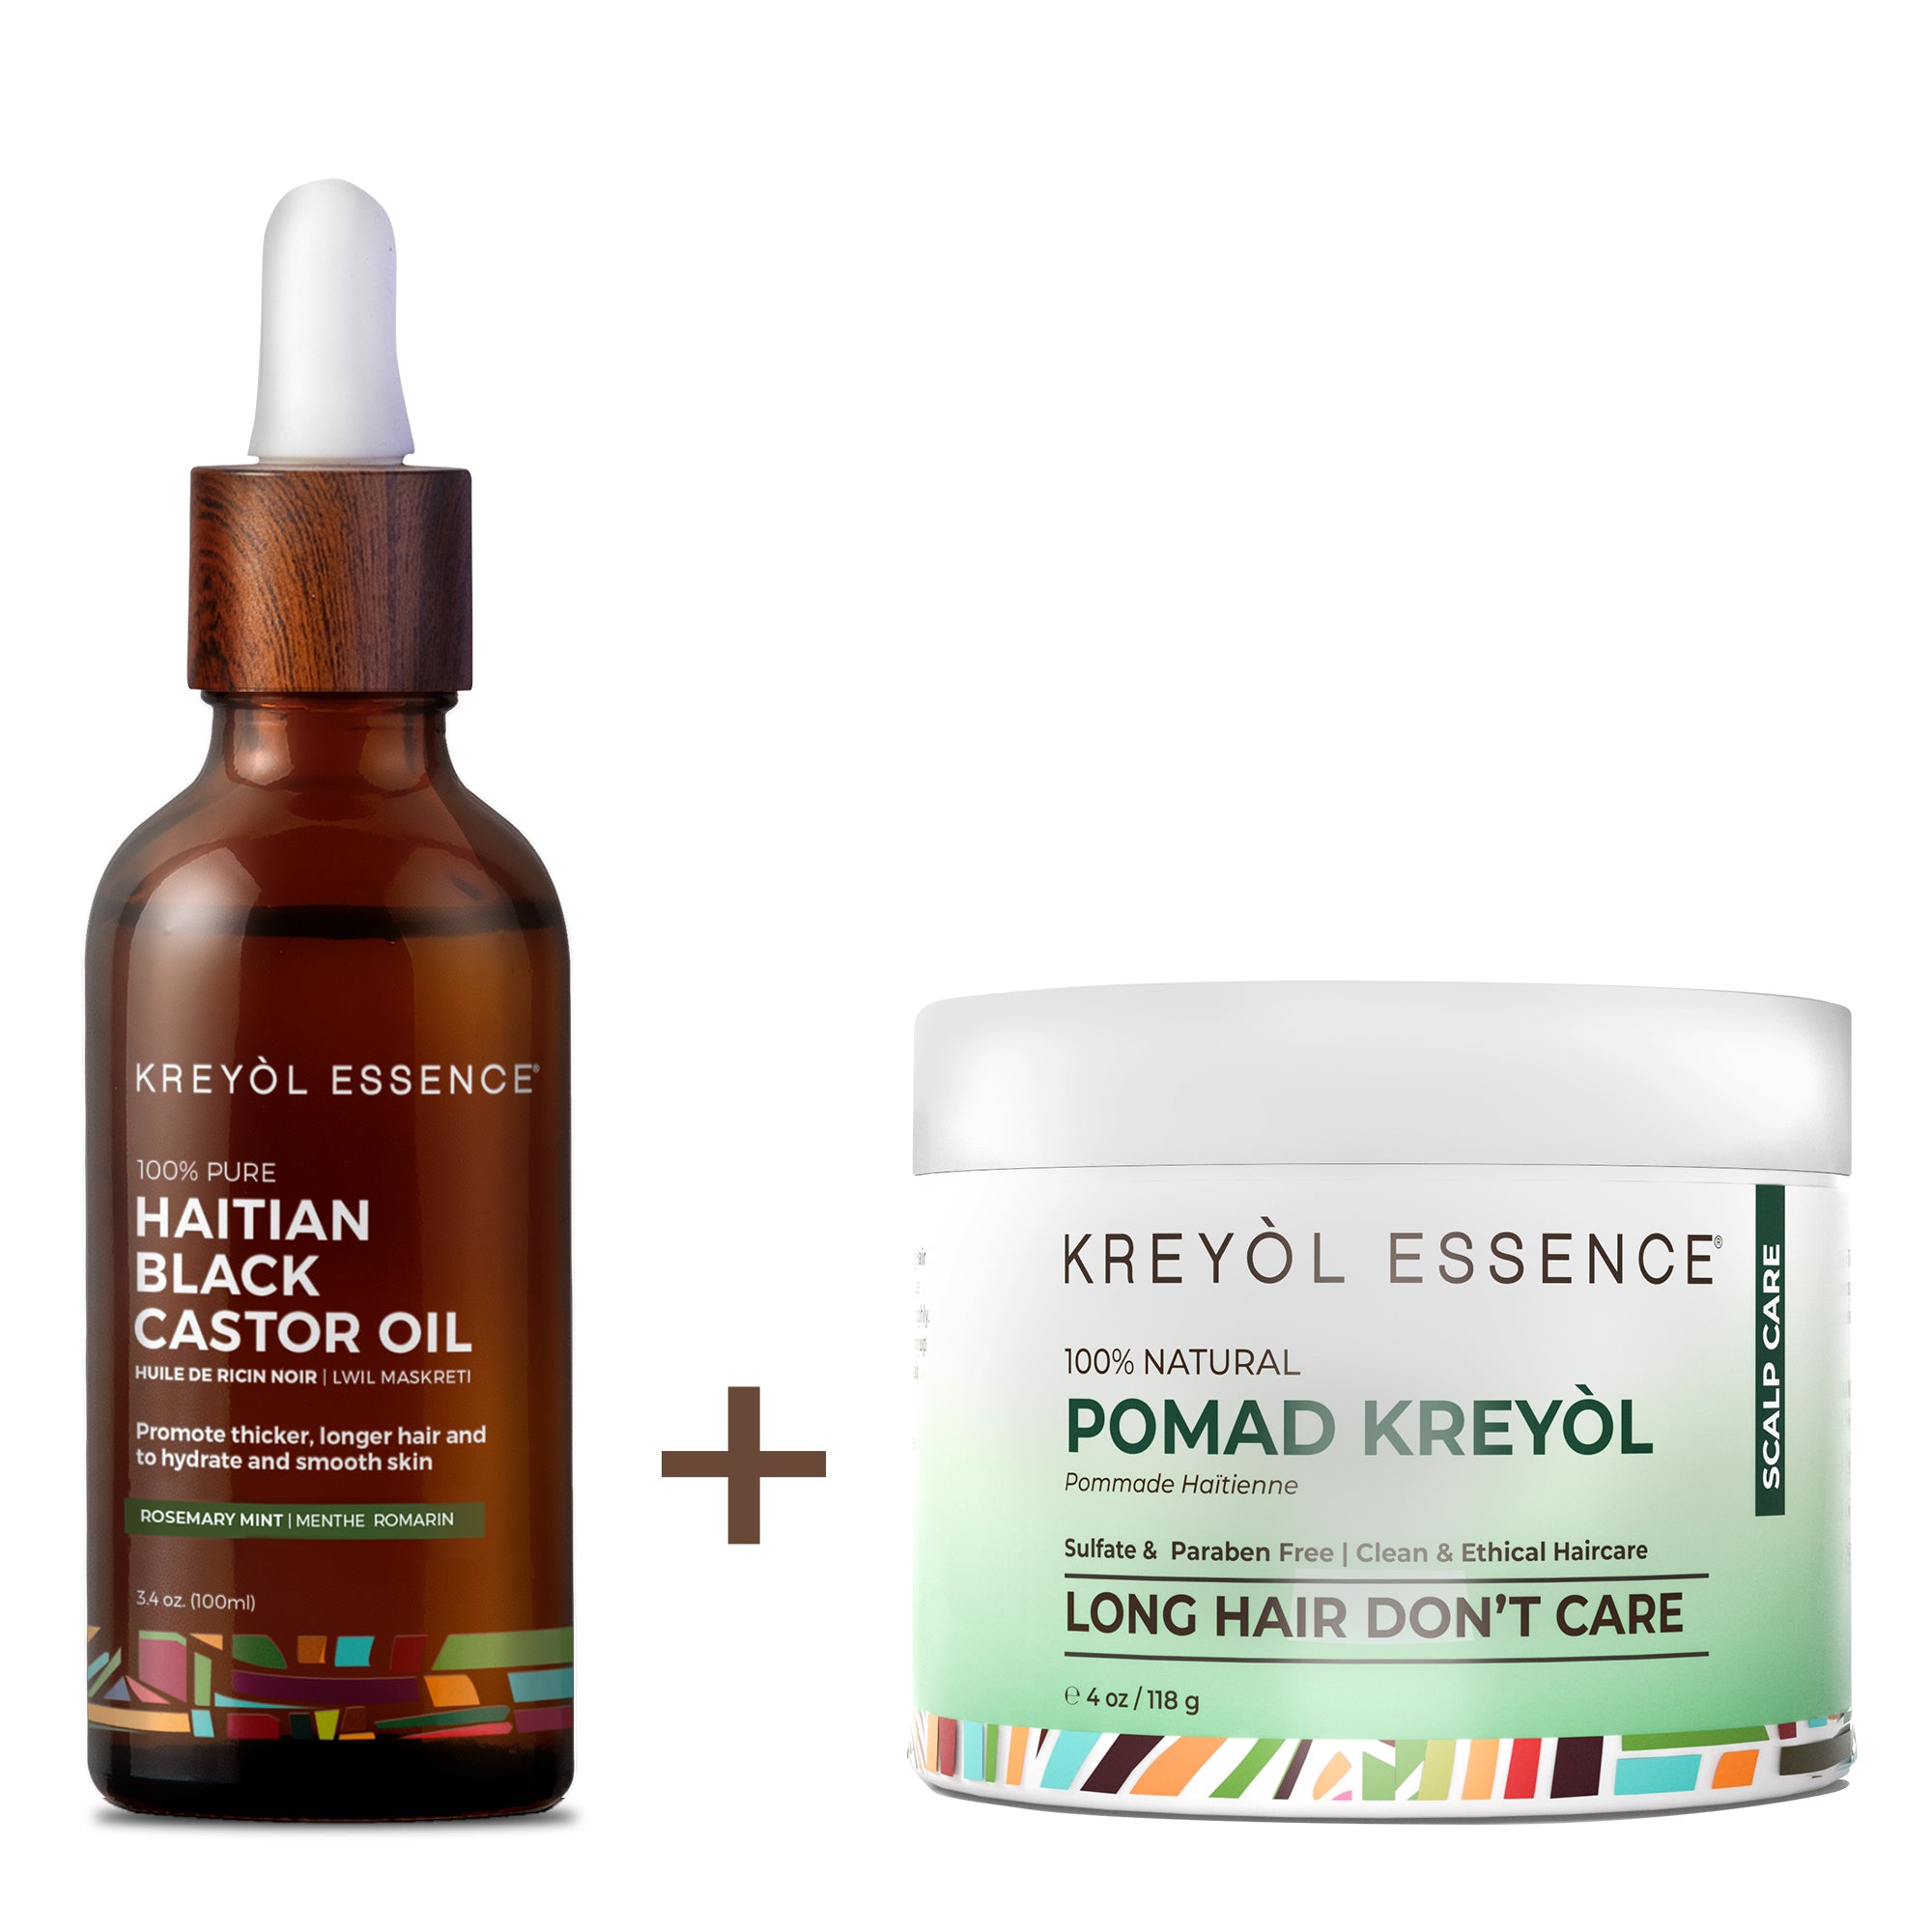 Buy 1 HBCO Rosemary Peppermint 3.4oz & Get 1 FREE Pomad Kreyol 4oz| "Save My Hairline" Growth Treatment Duo